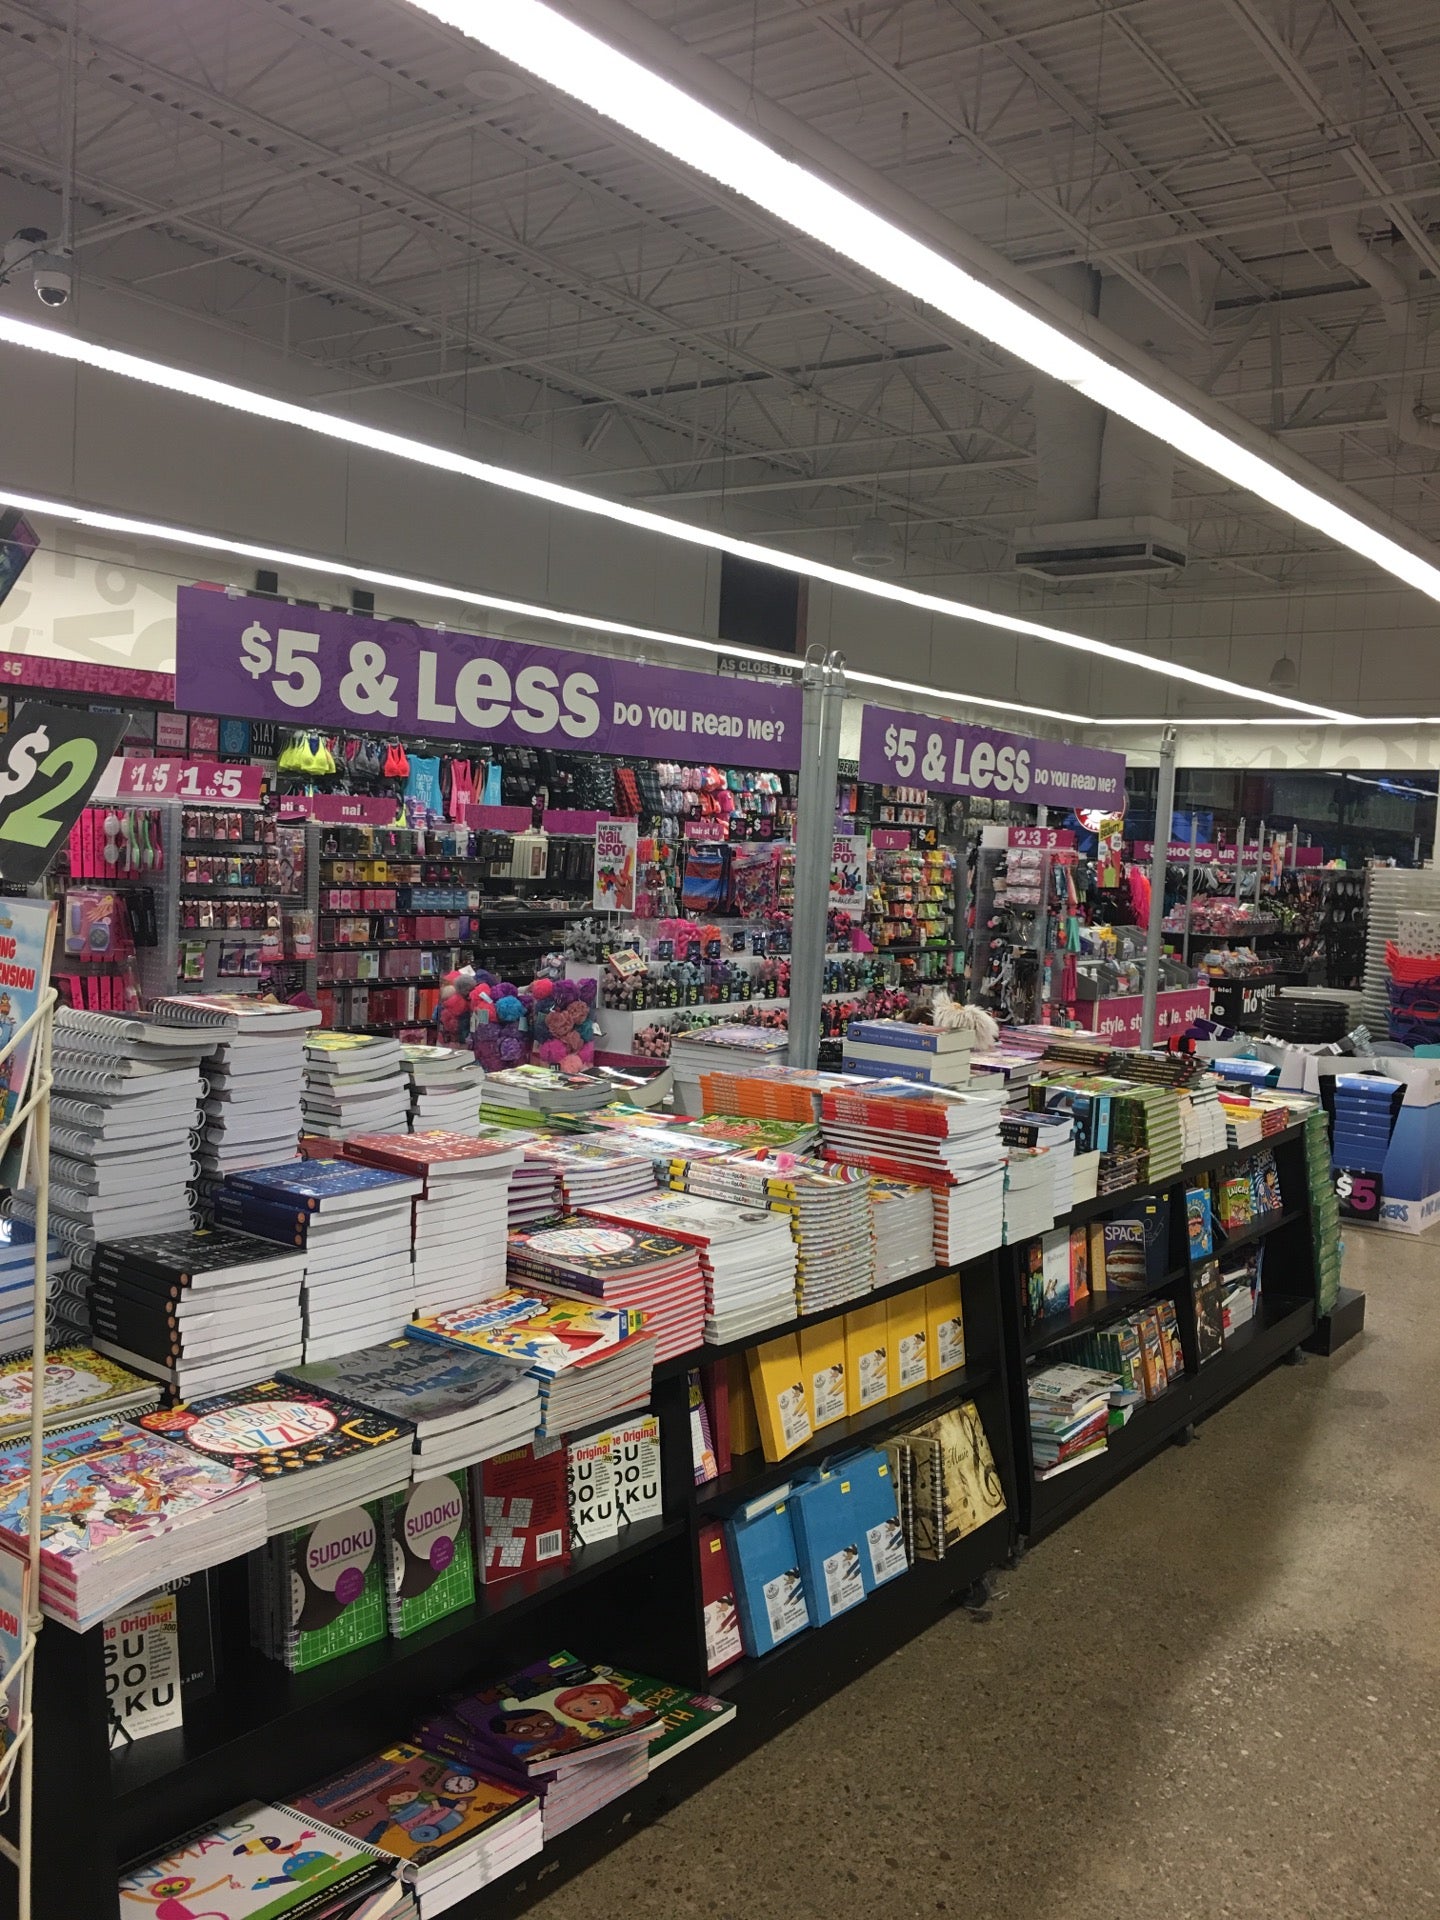 Five Below, 4816 Ridge Rd, Cleveland, OH, Gifts Specialty - MapQuest